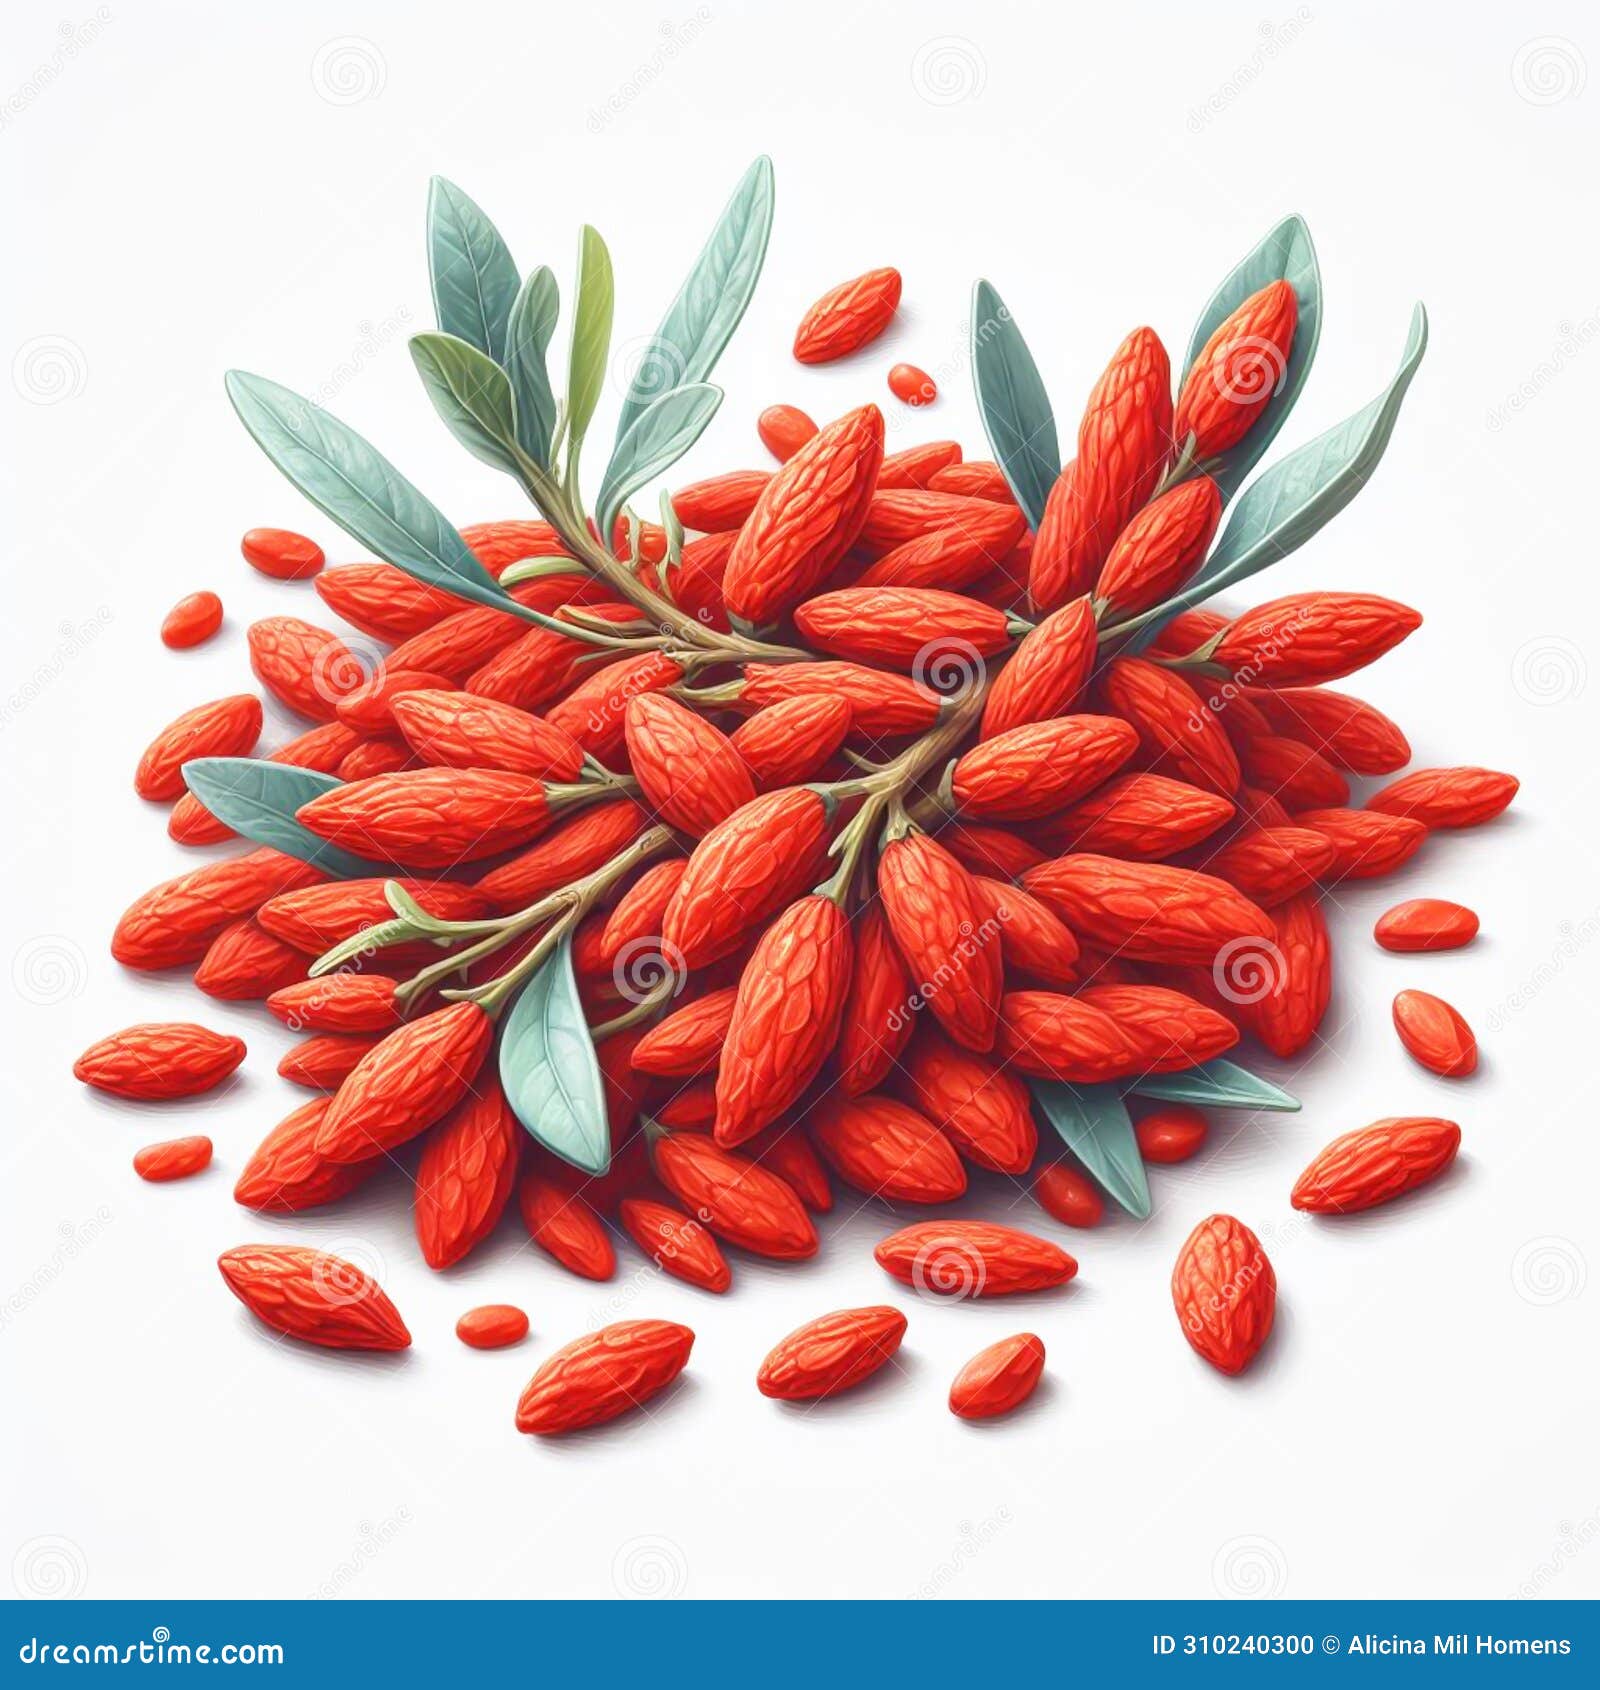 goji berry, known for being rich in nutrients, originates from china. healthy food. ai generated